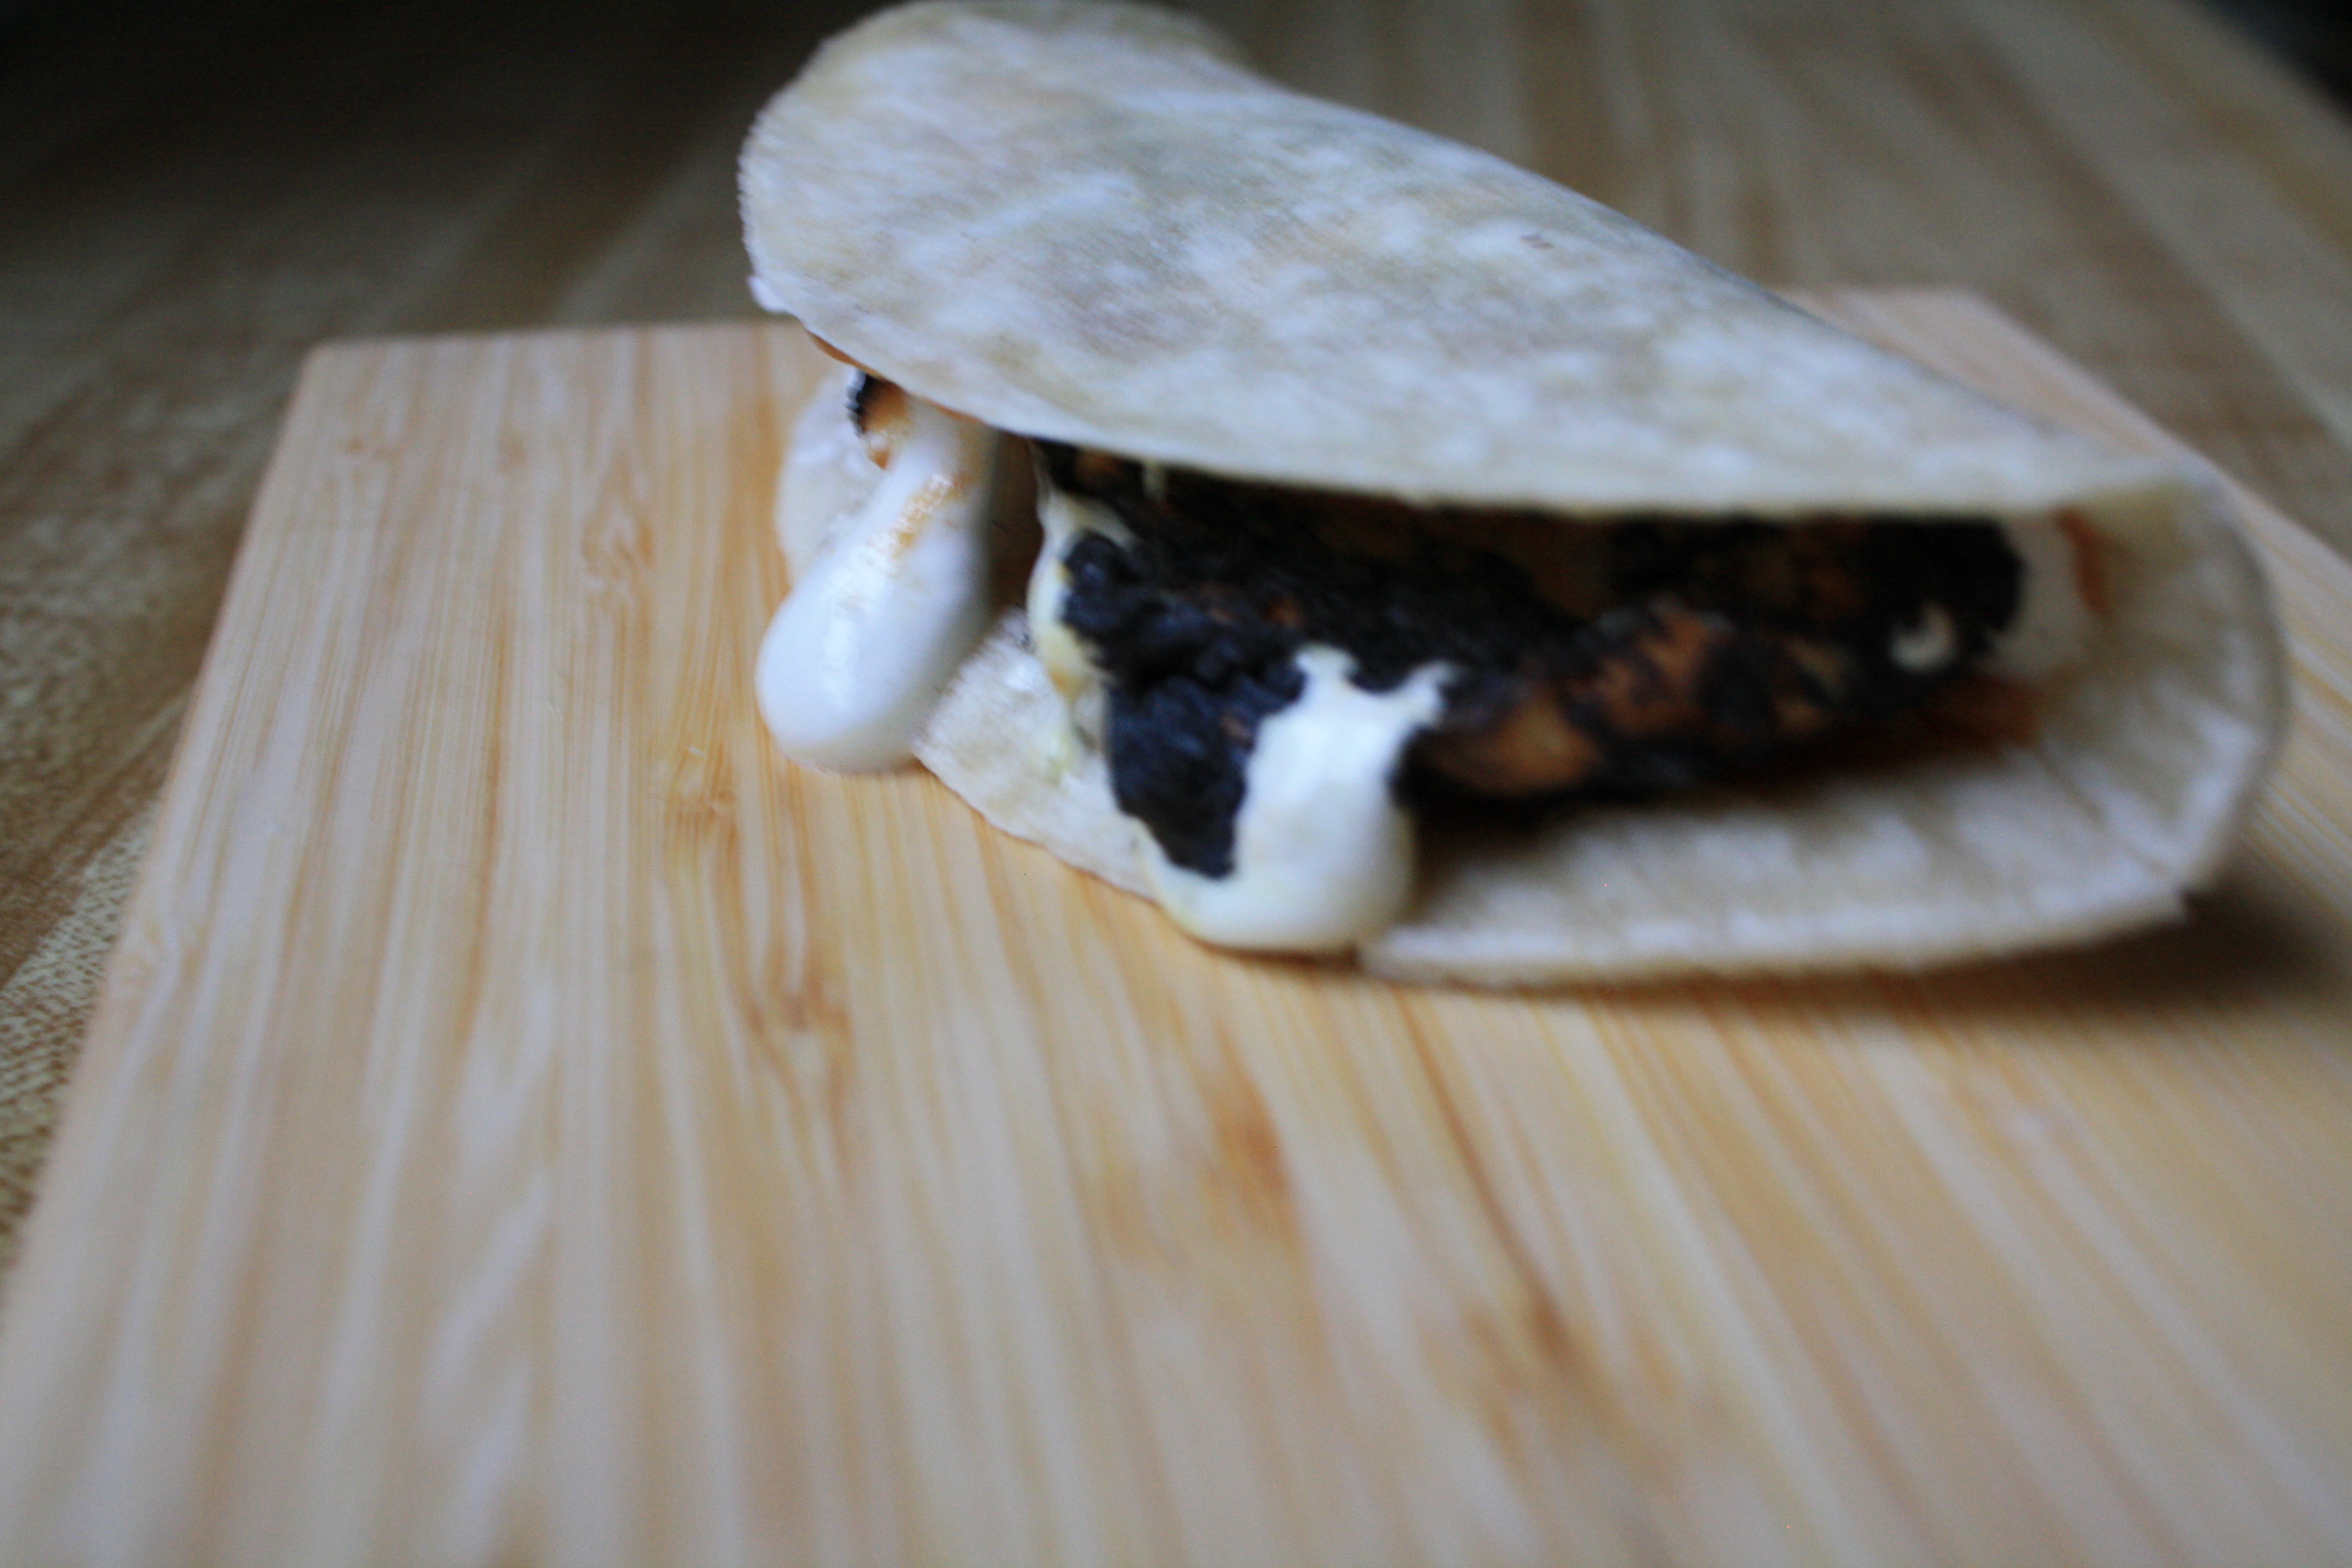 s'more tacos